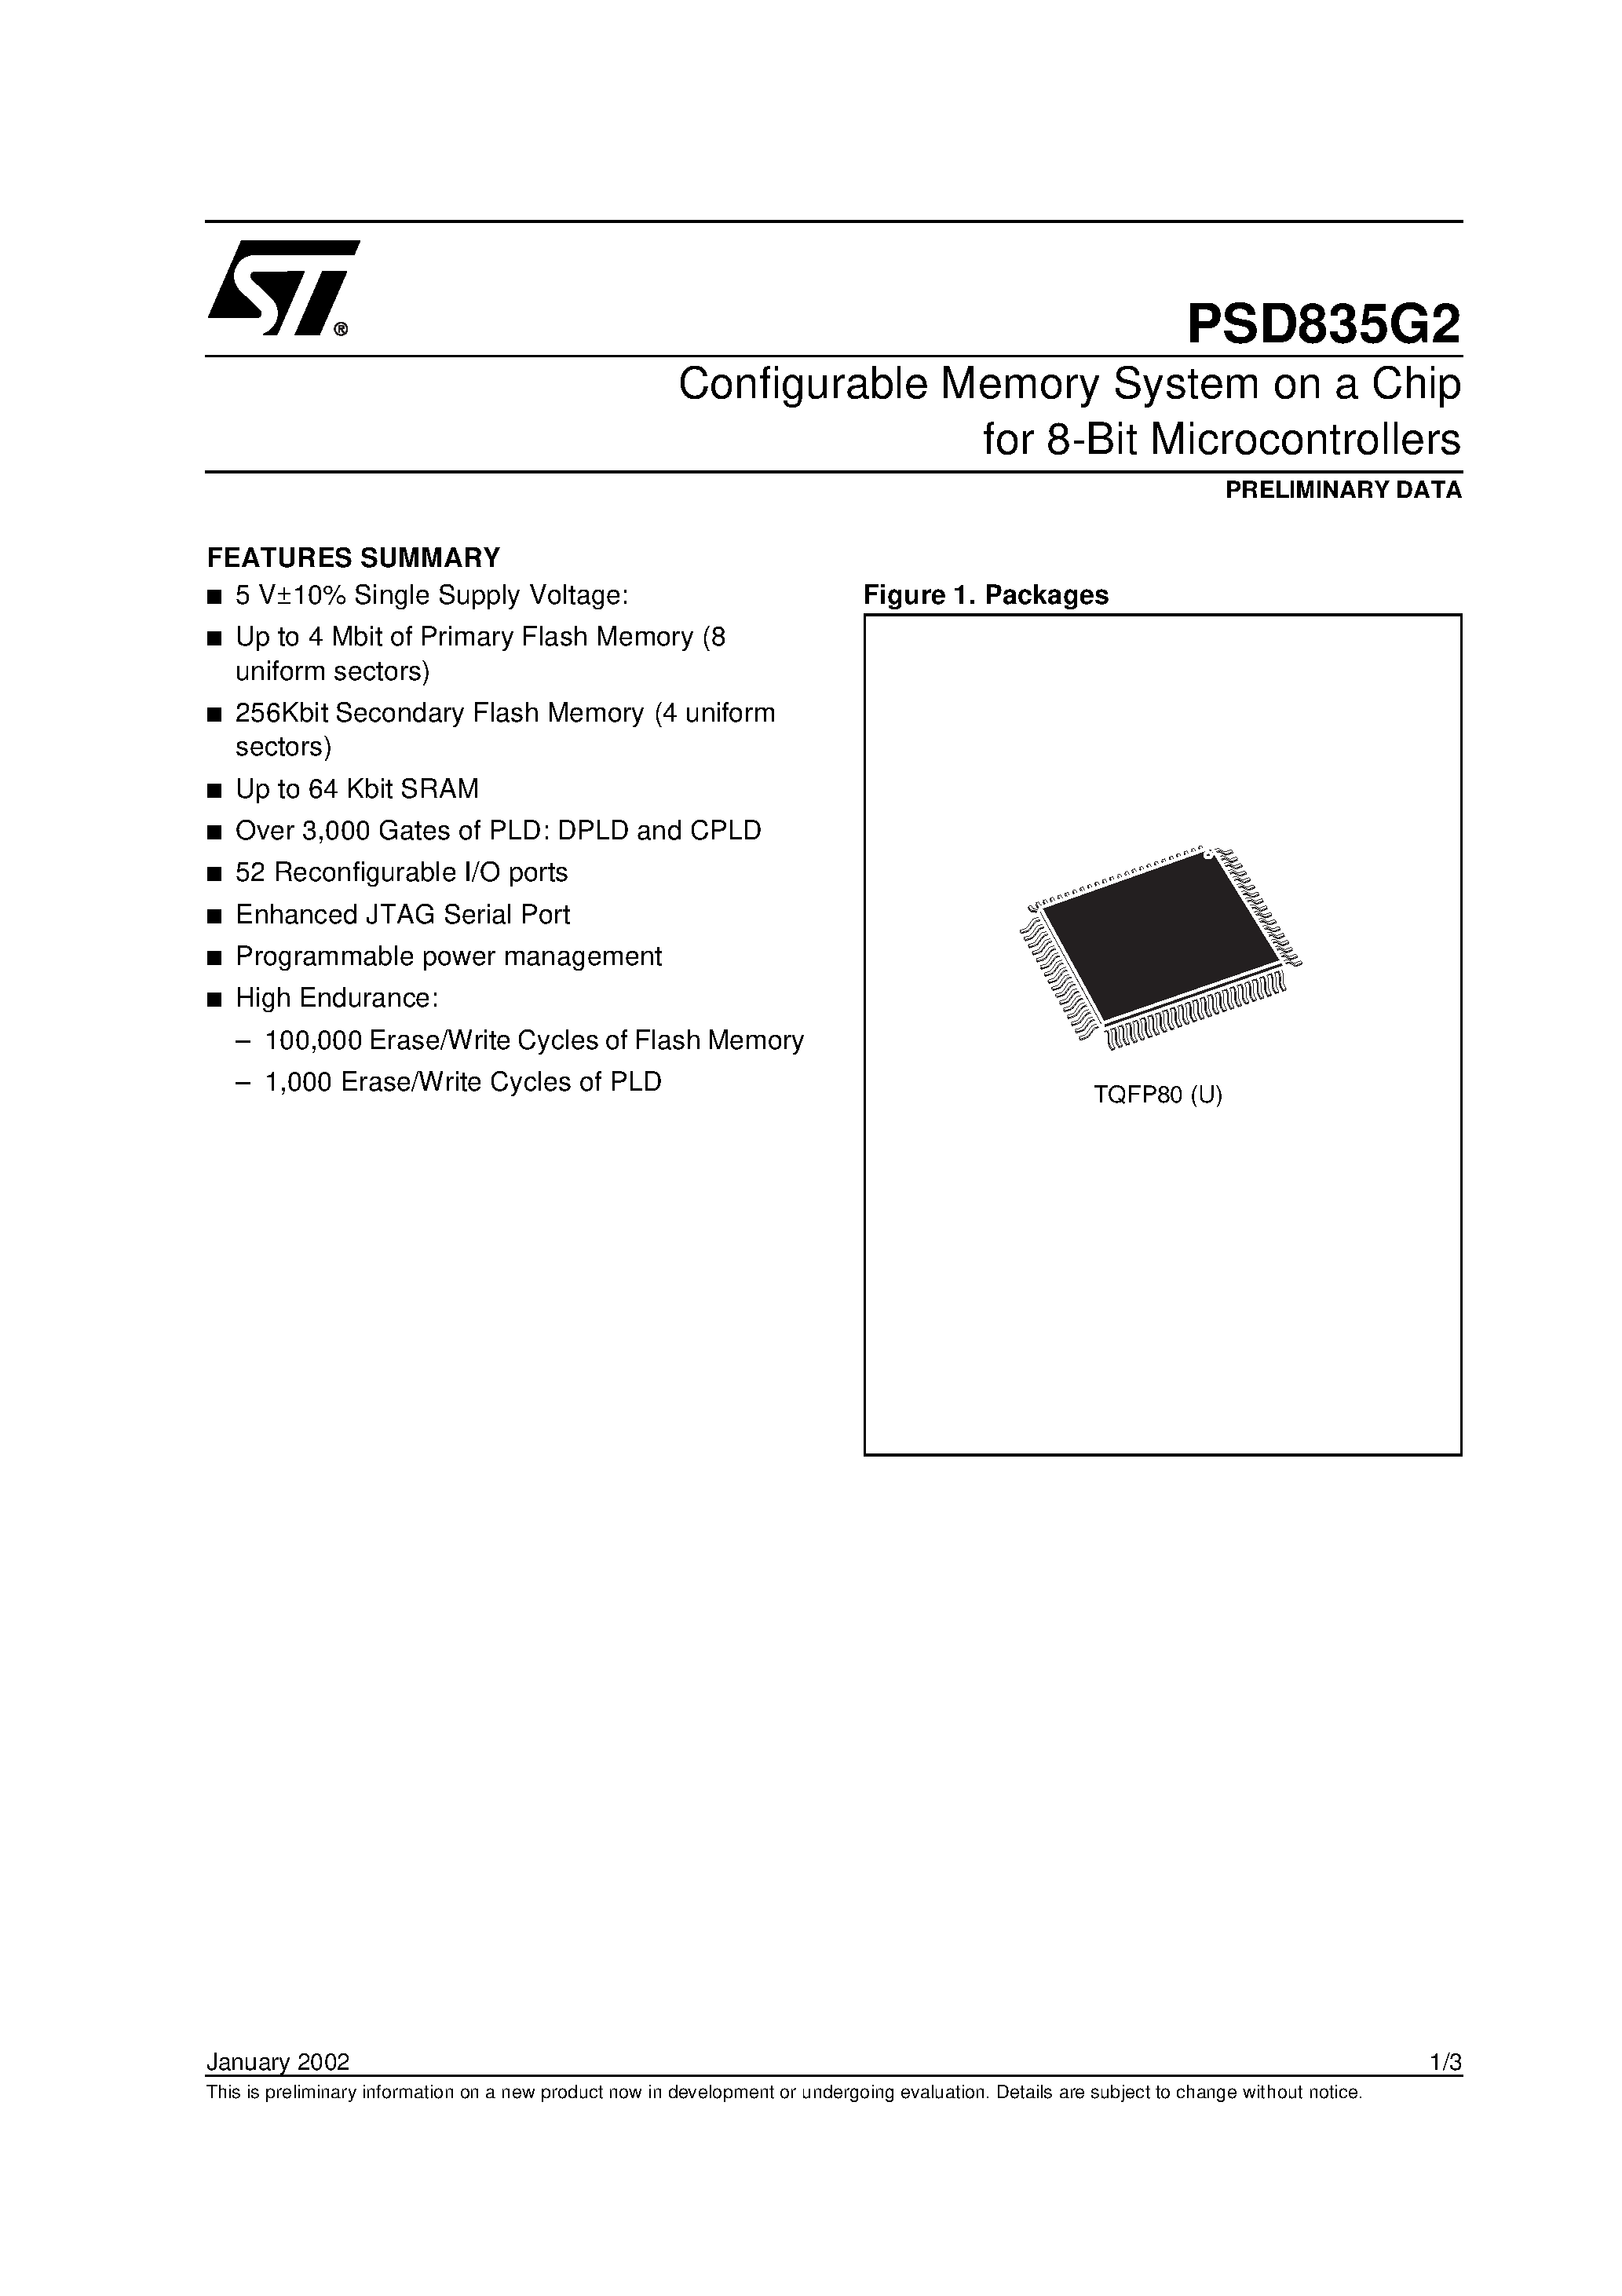 Datasheet PSD835F1-A-90JI - Configurable Memory System on a Chip for 8-Bit Microcontrollers page 1